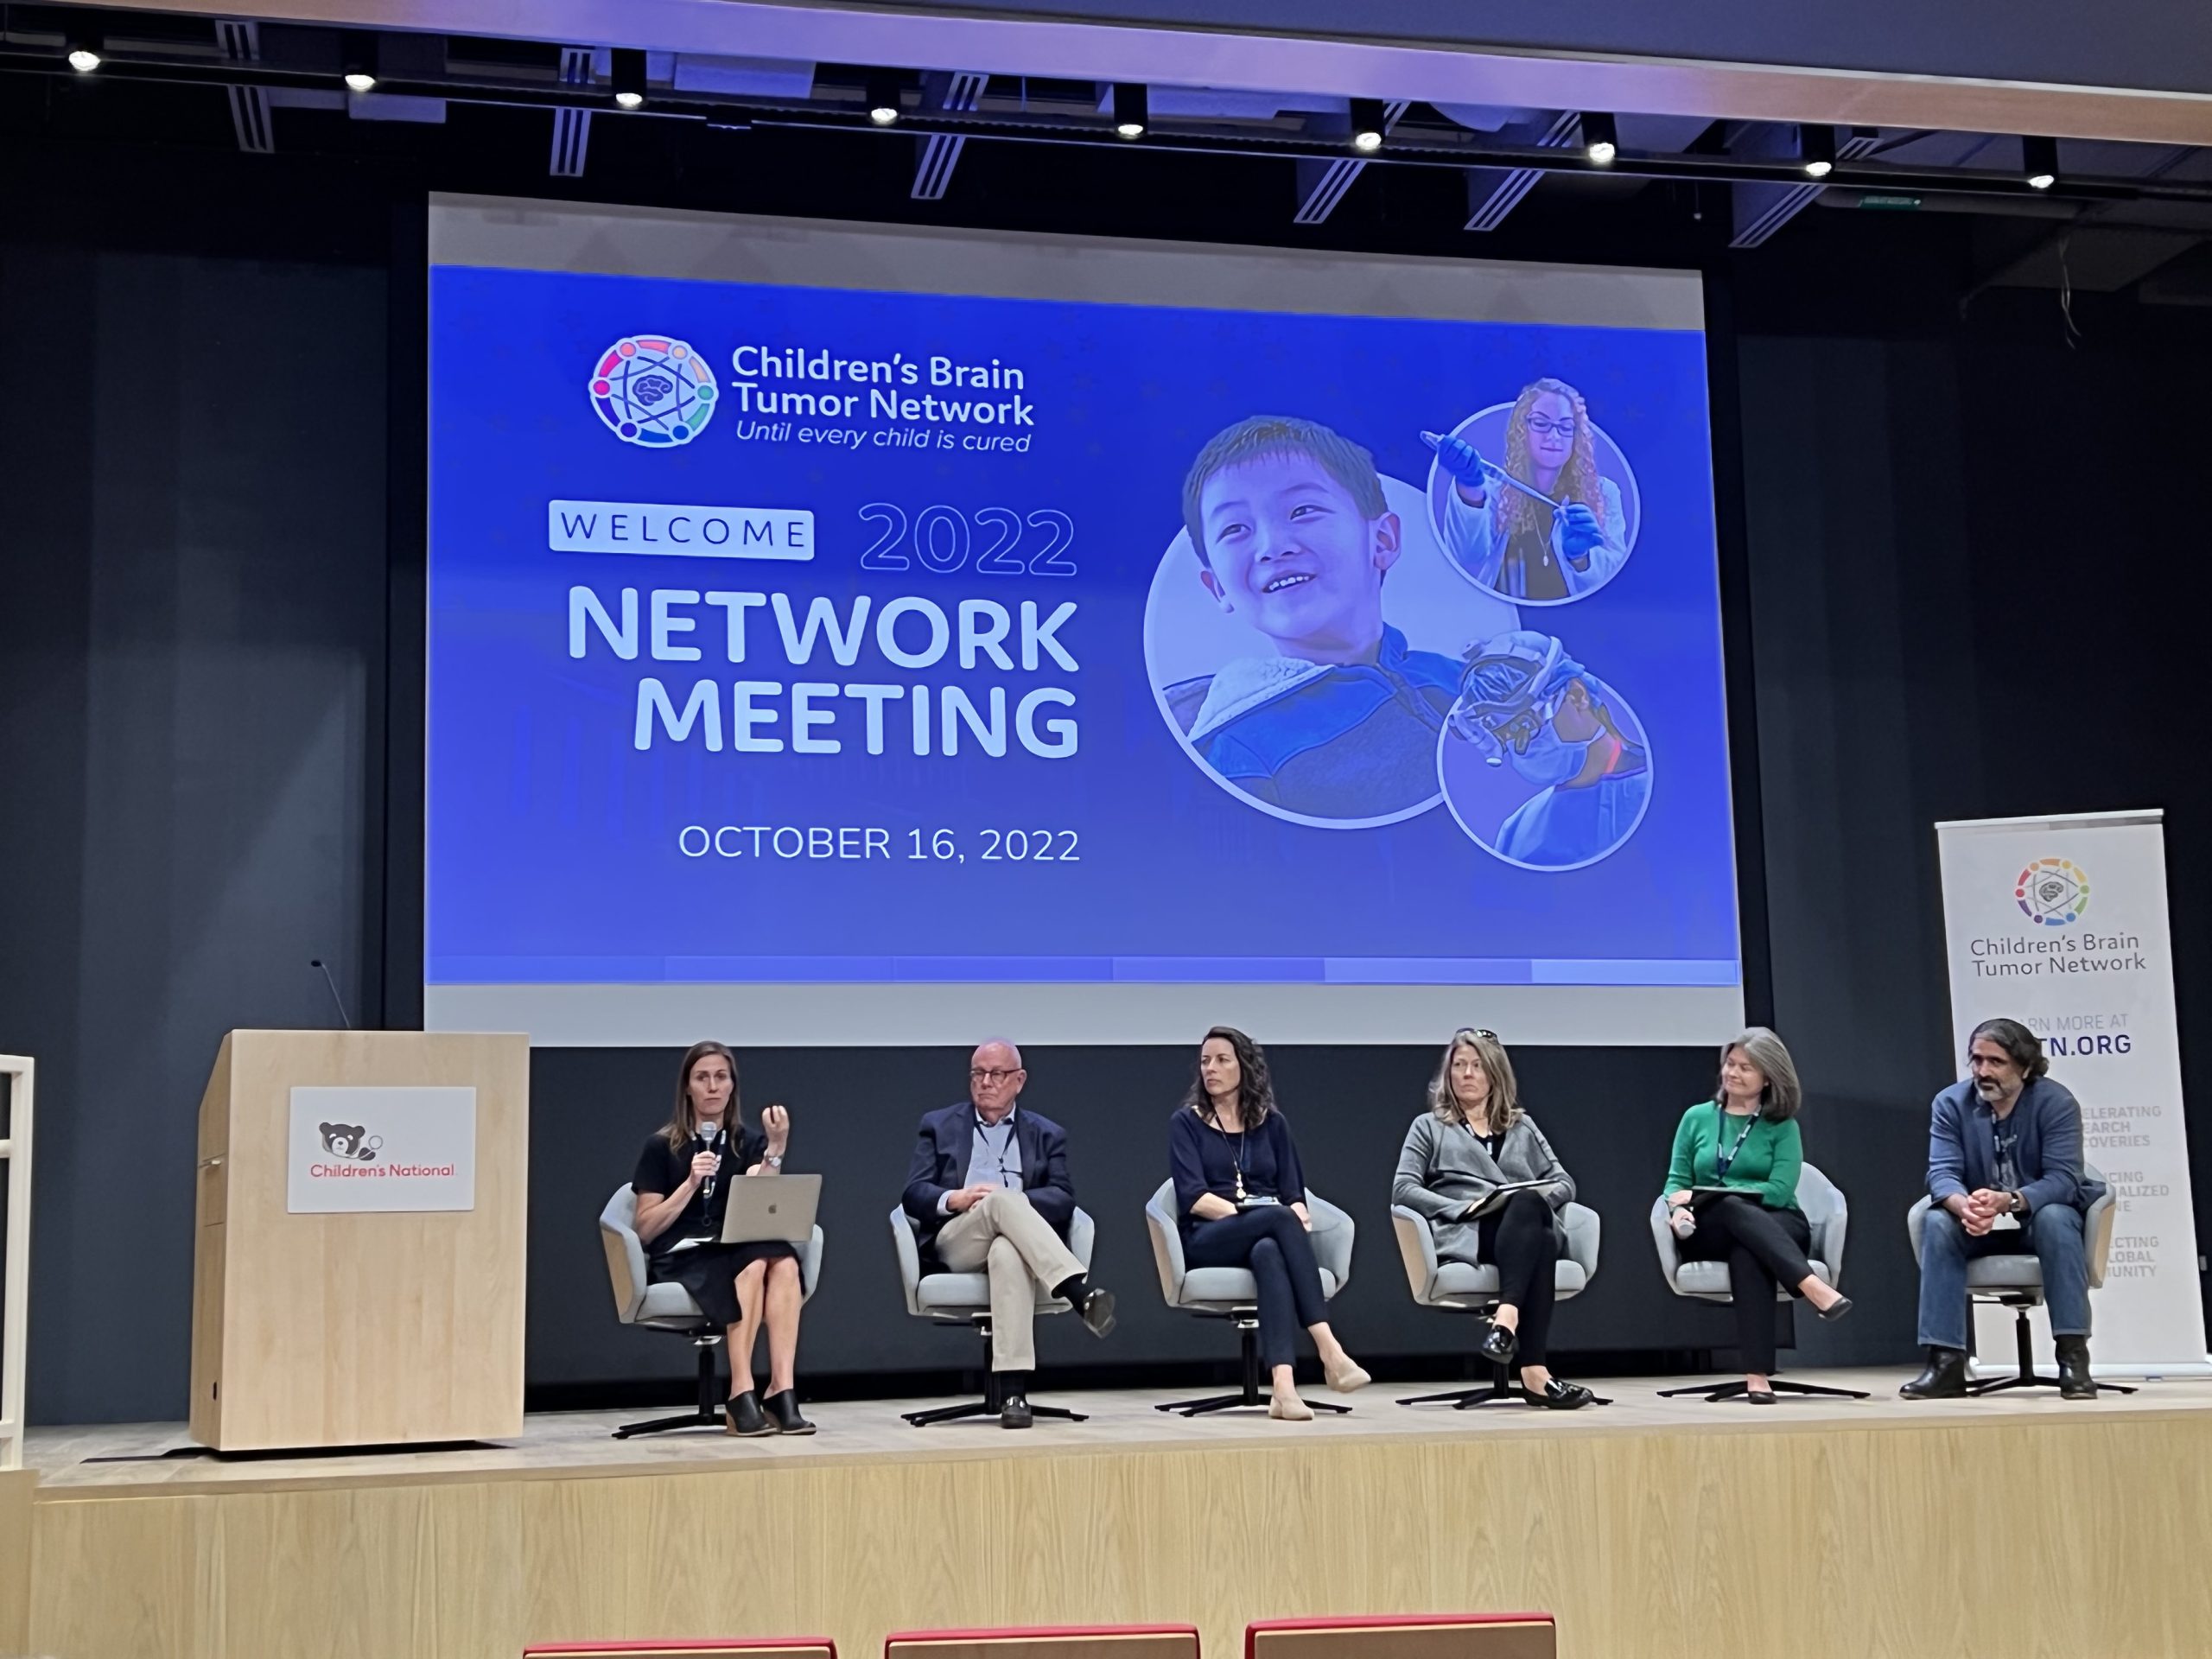 Children’s Brain Tumor Network is Leading the Charge for Change—We’re With Them